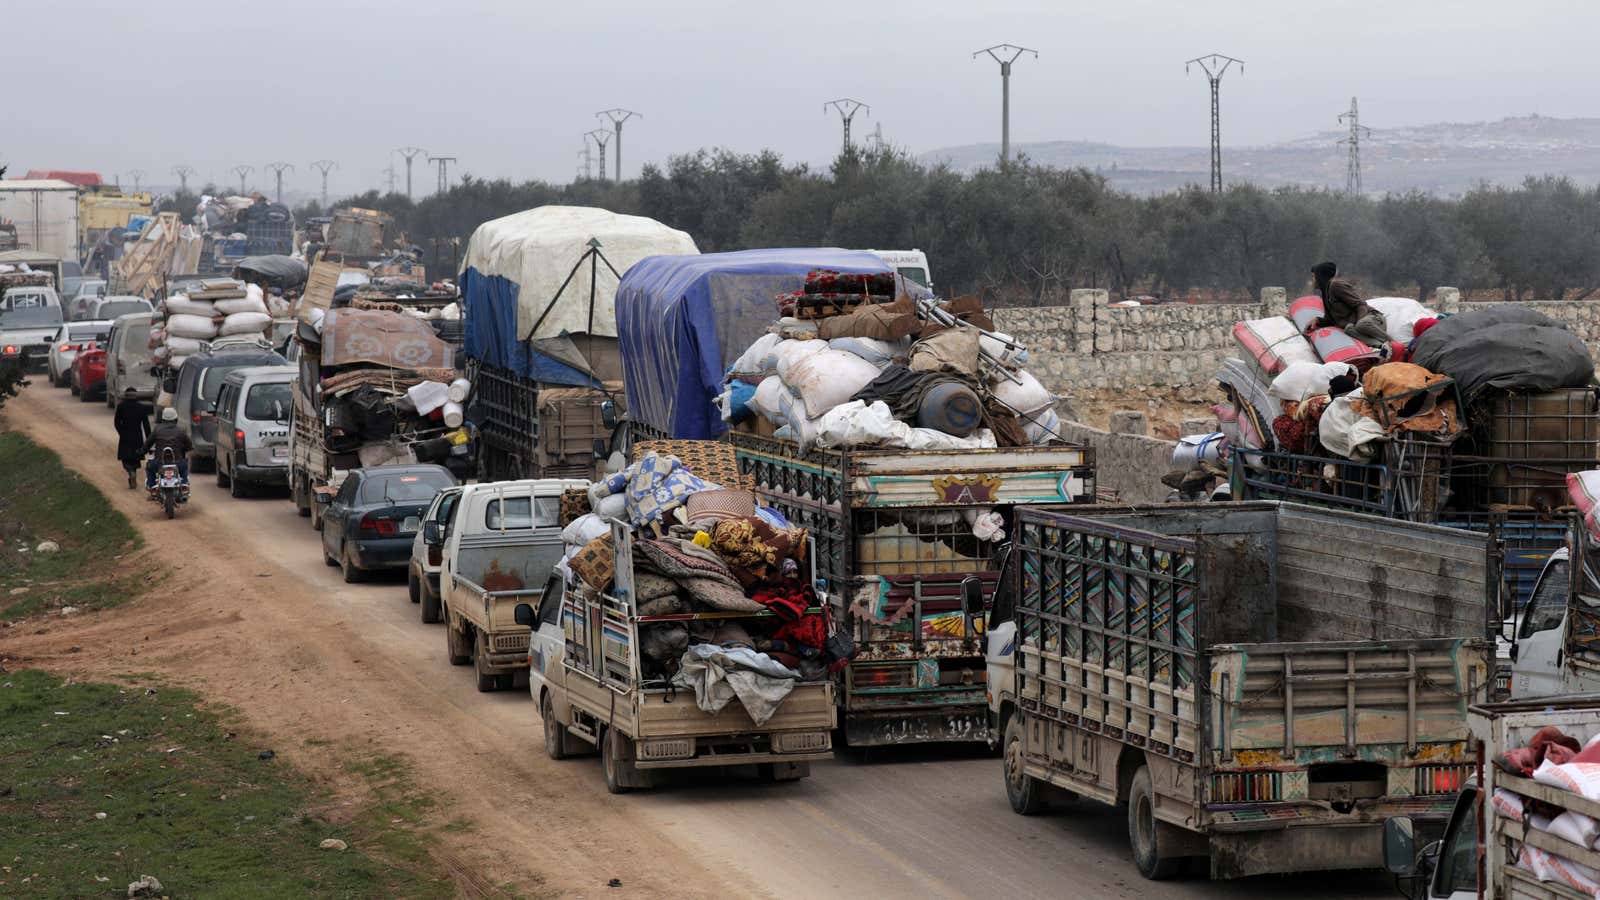 Vehicles carrying the belongings of displaced persons.